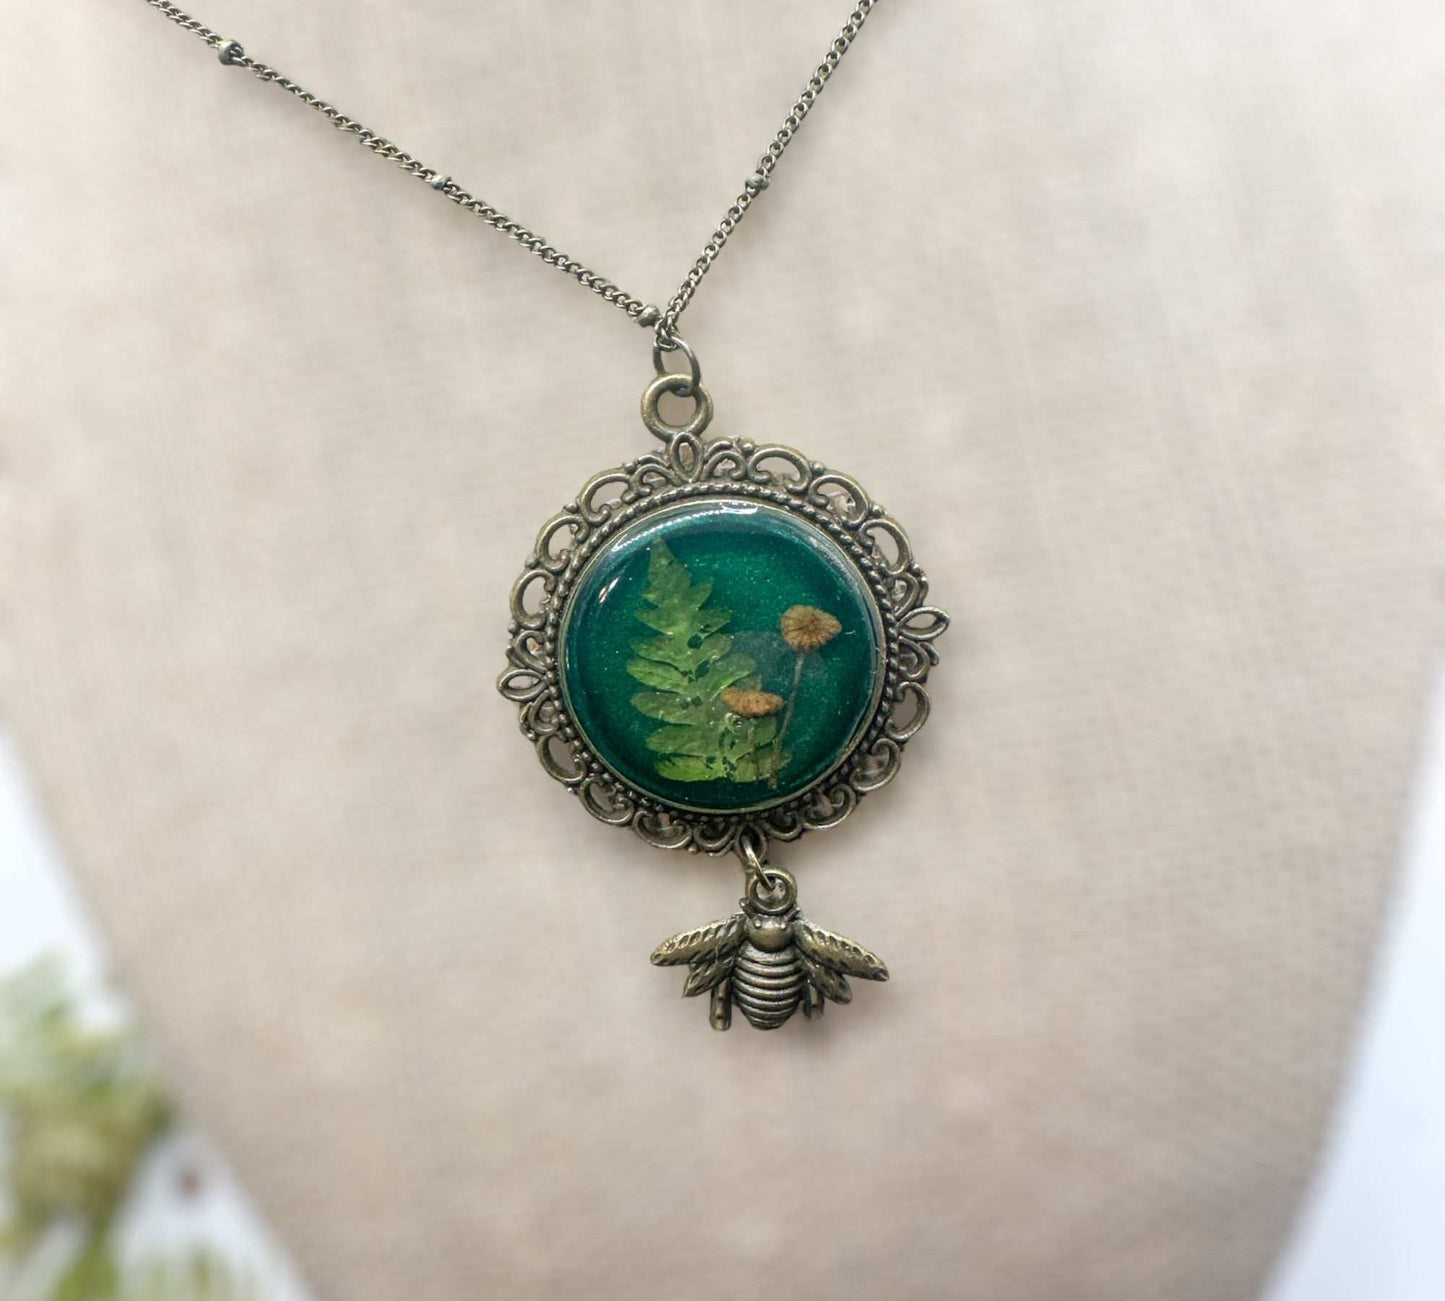 Mushroom Pendant - Magical Green Forest with Copper Bee